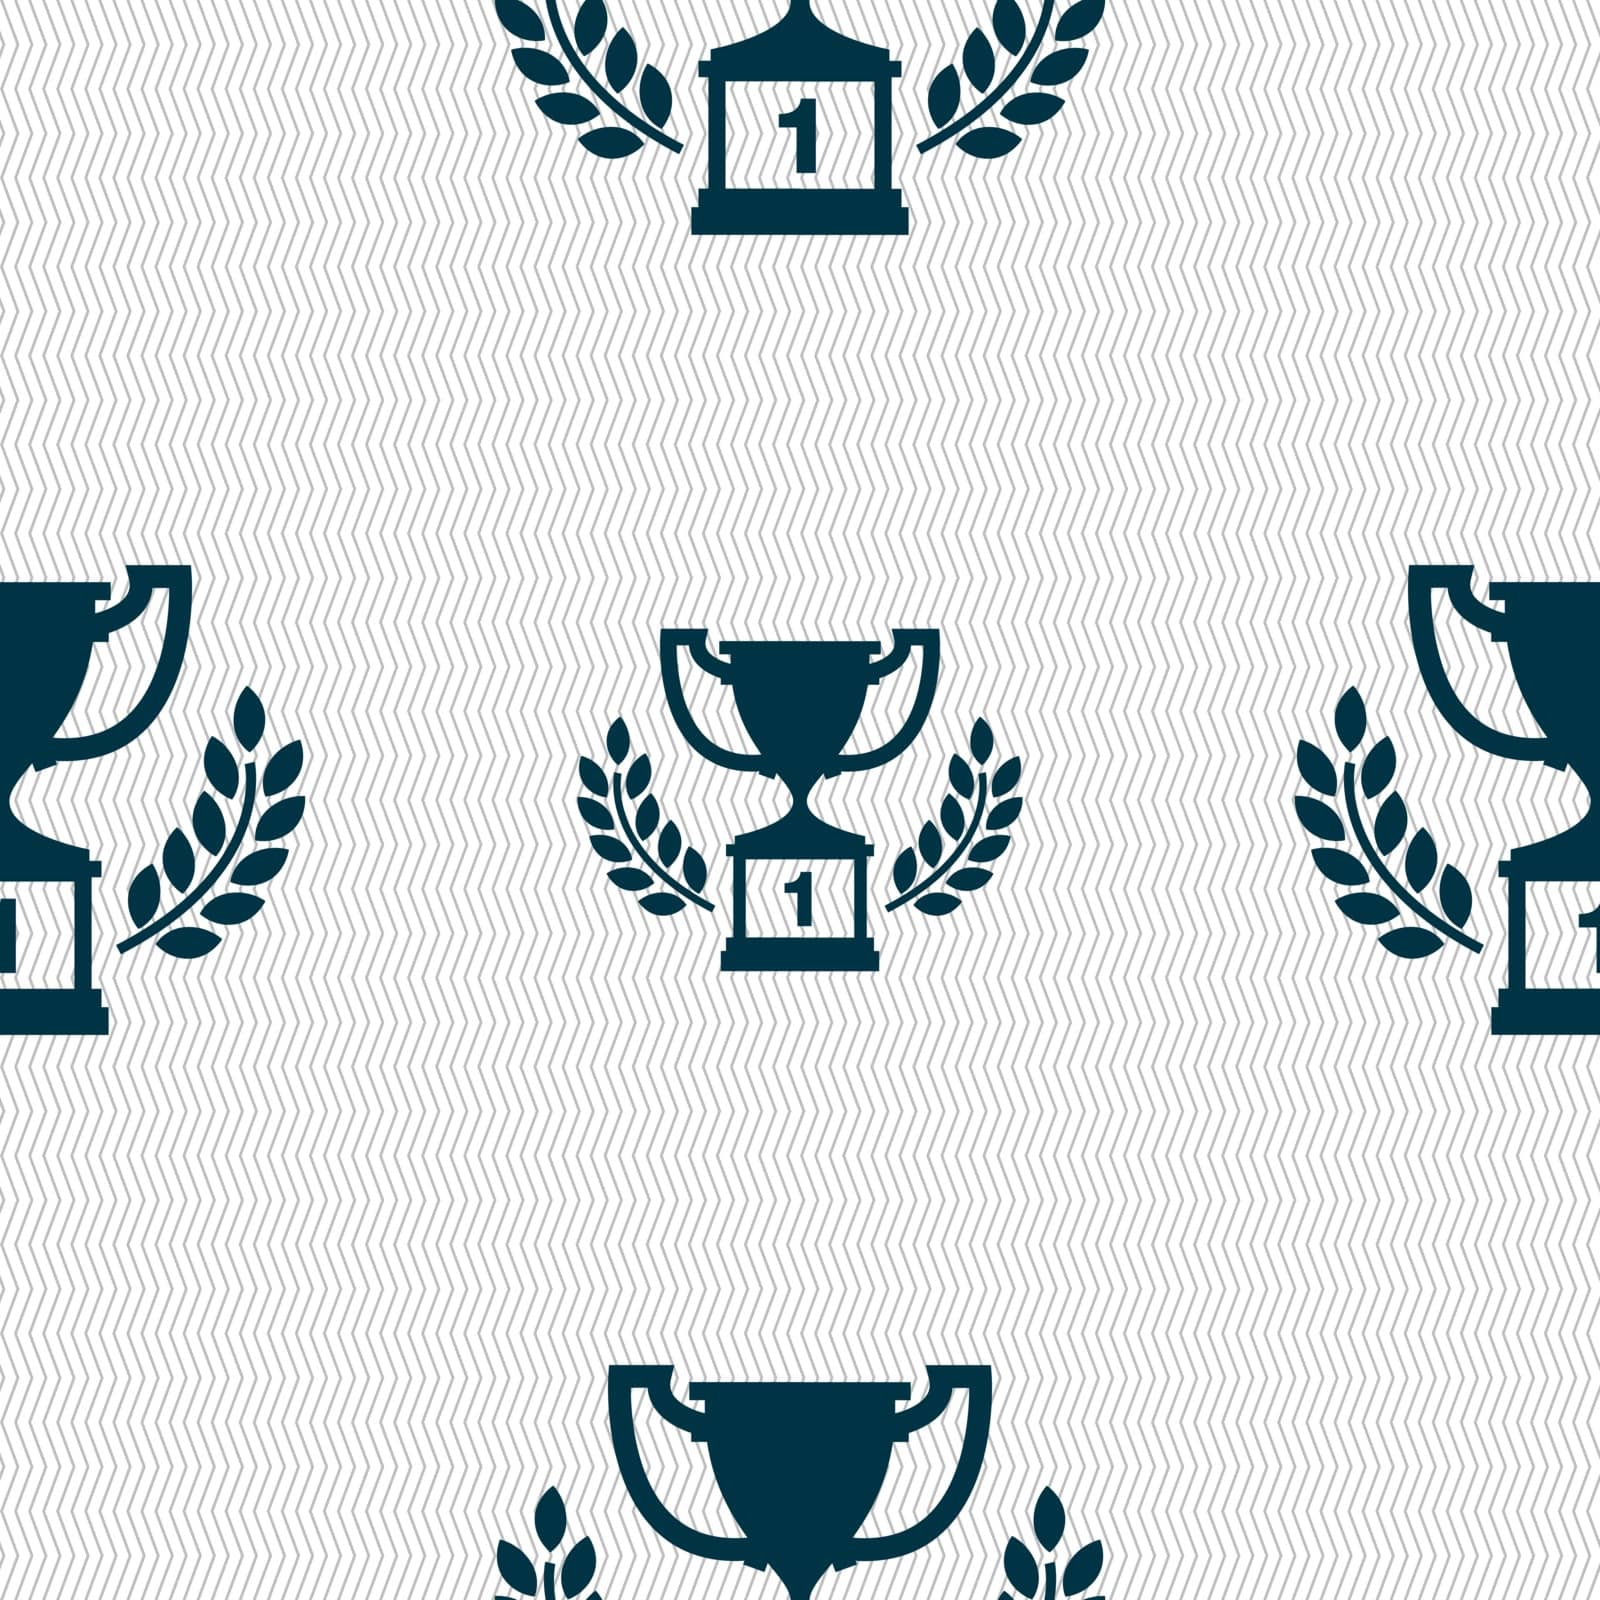 Champions cup, Trophy icon sign. Seamless pattern with geometric texture. Vector illustration